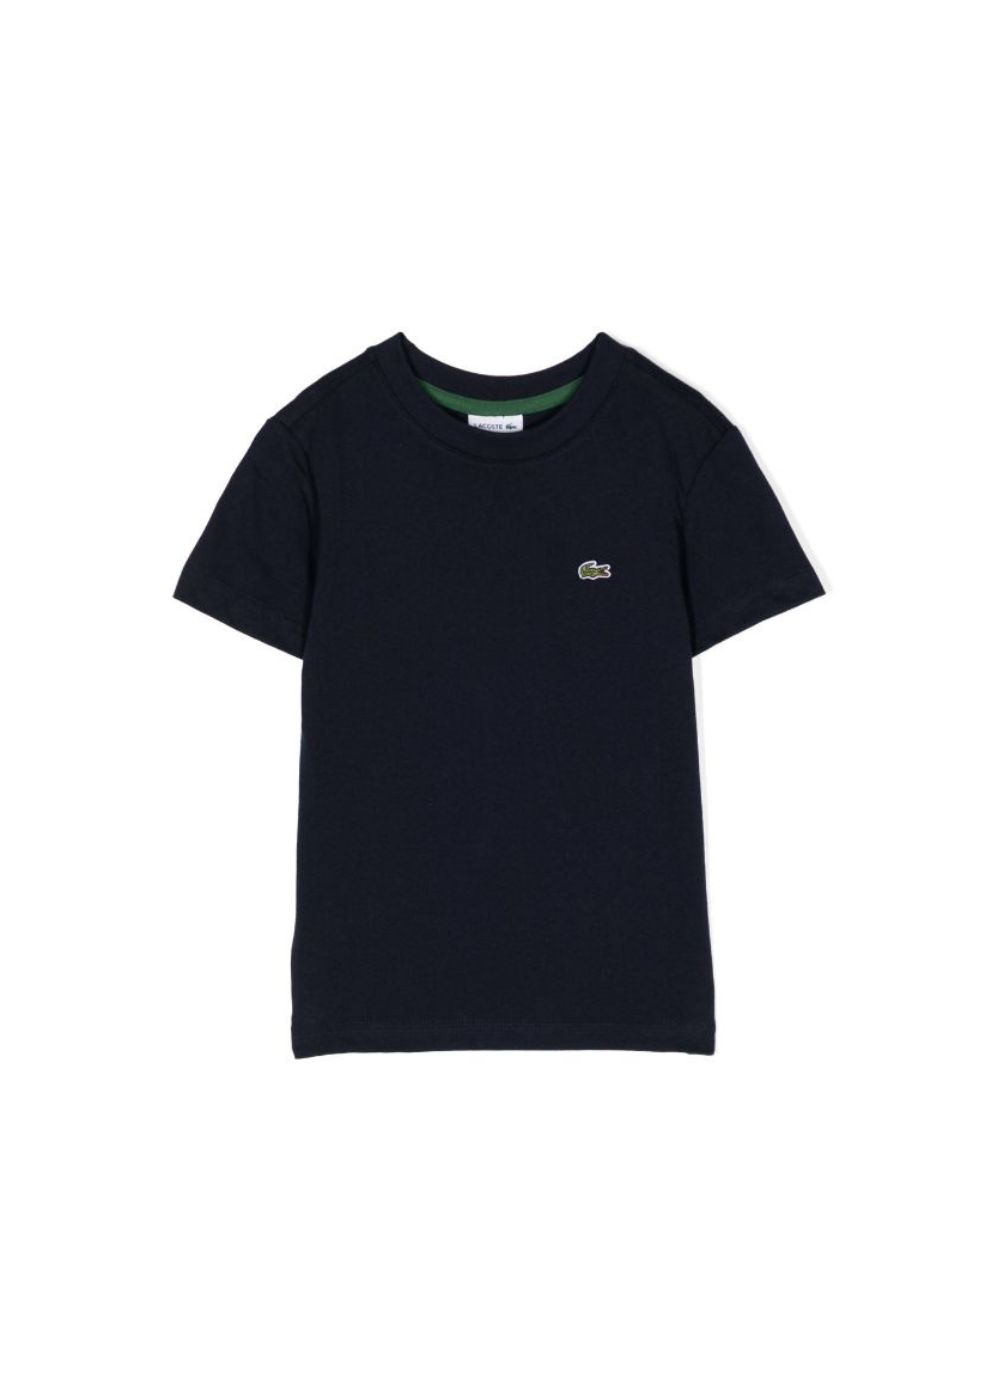 Featured image for “Lacoste T-shirt con applicazione”